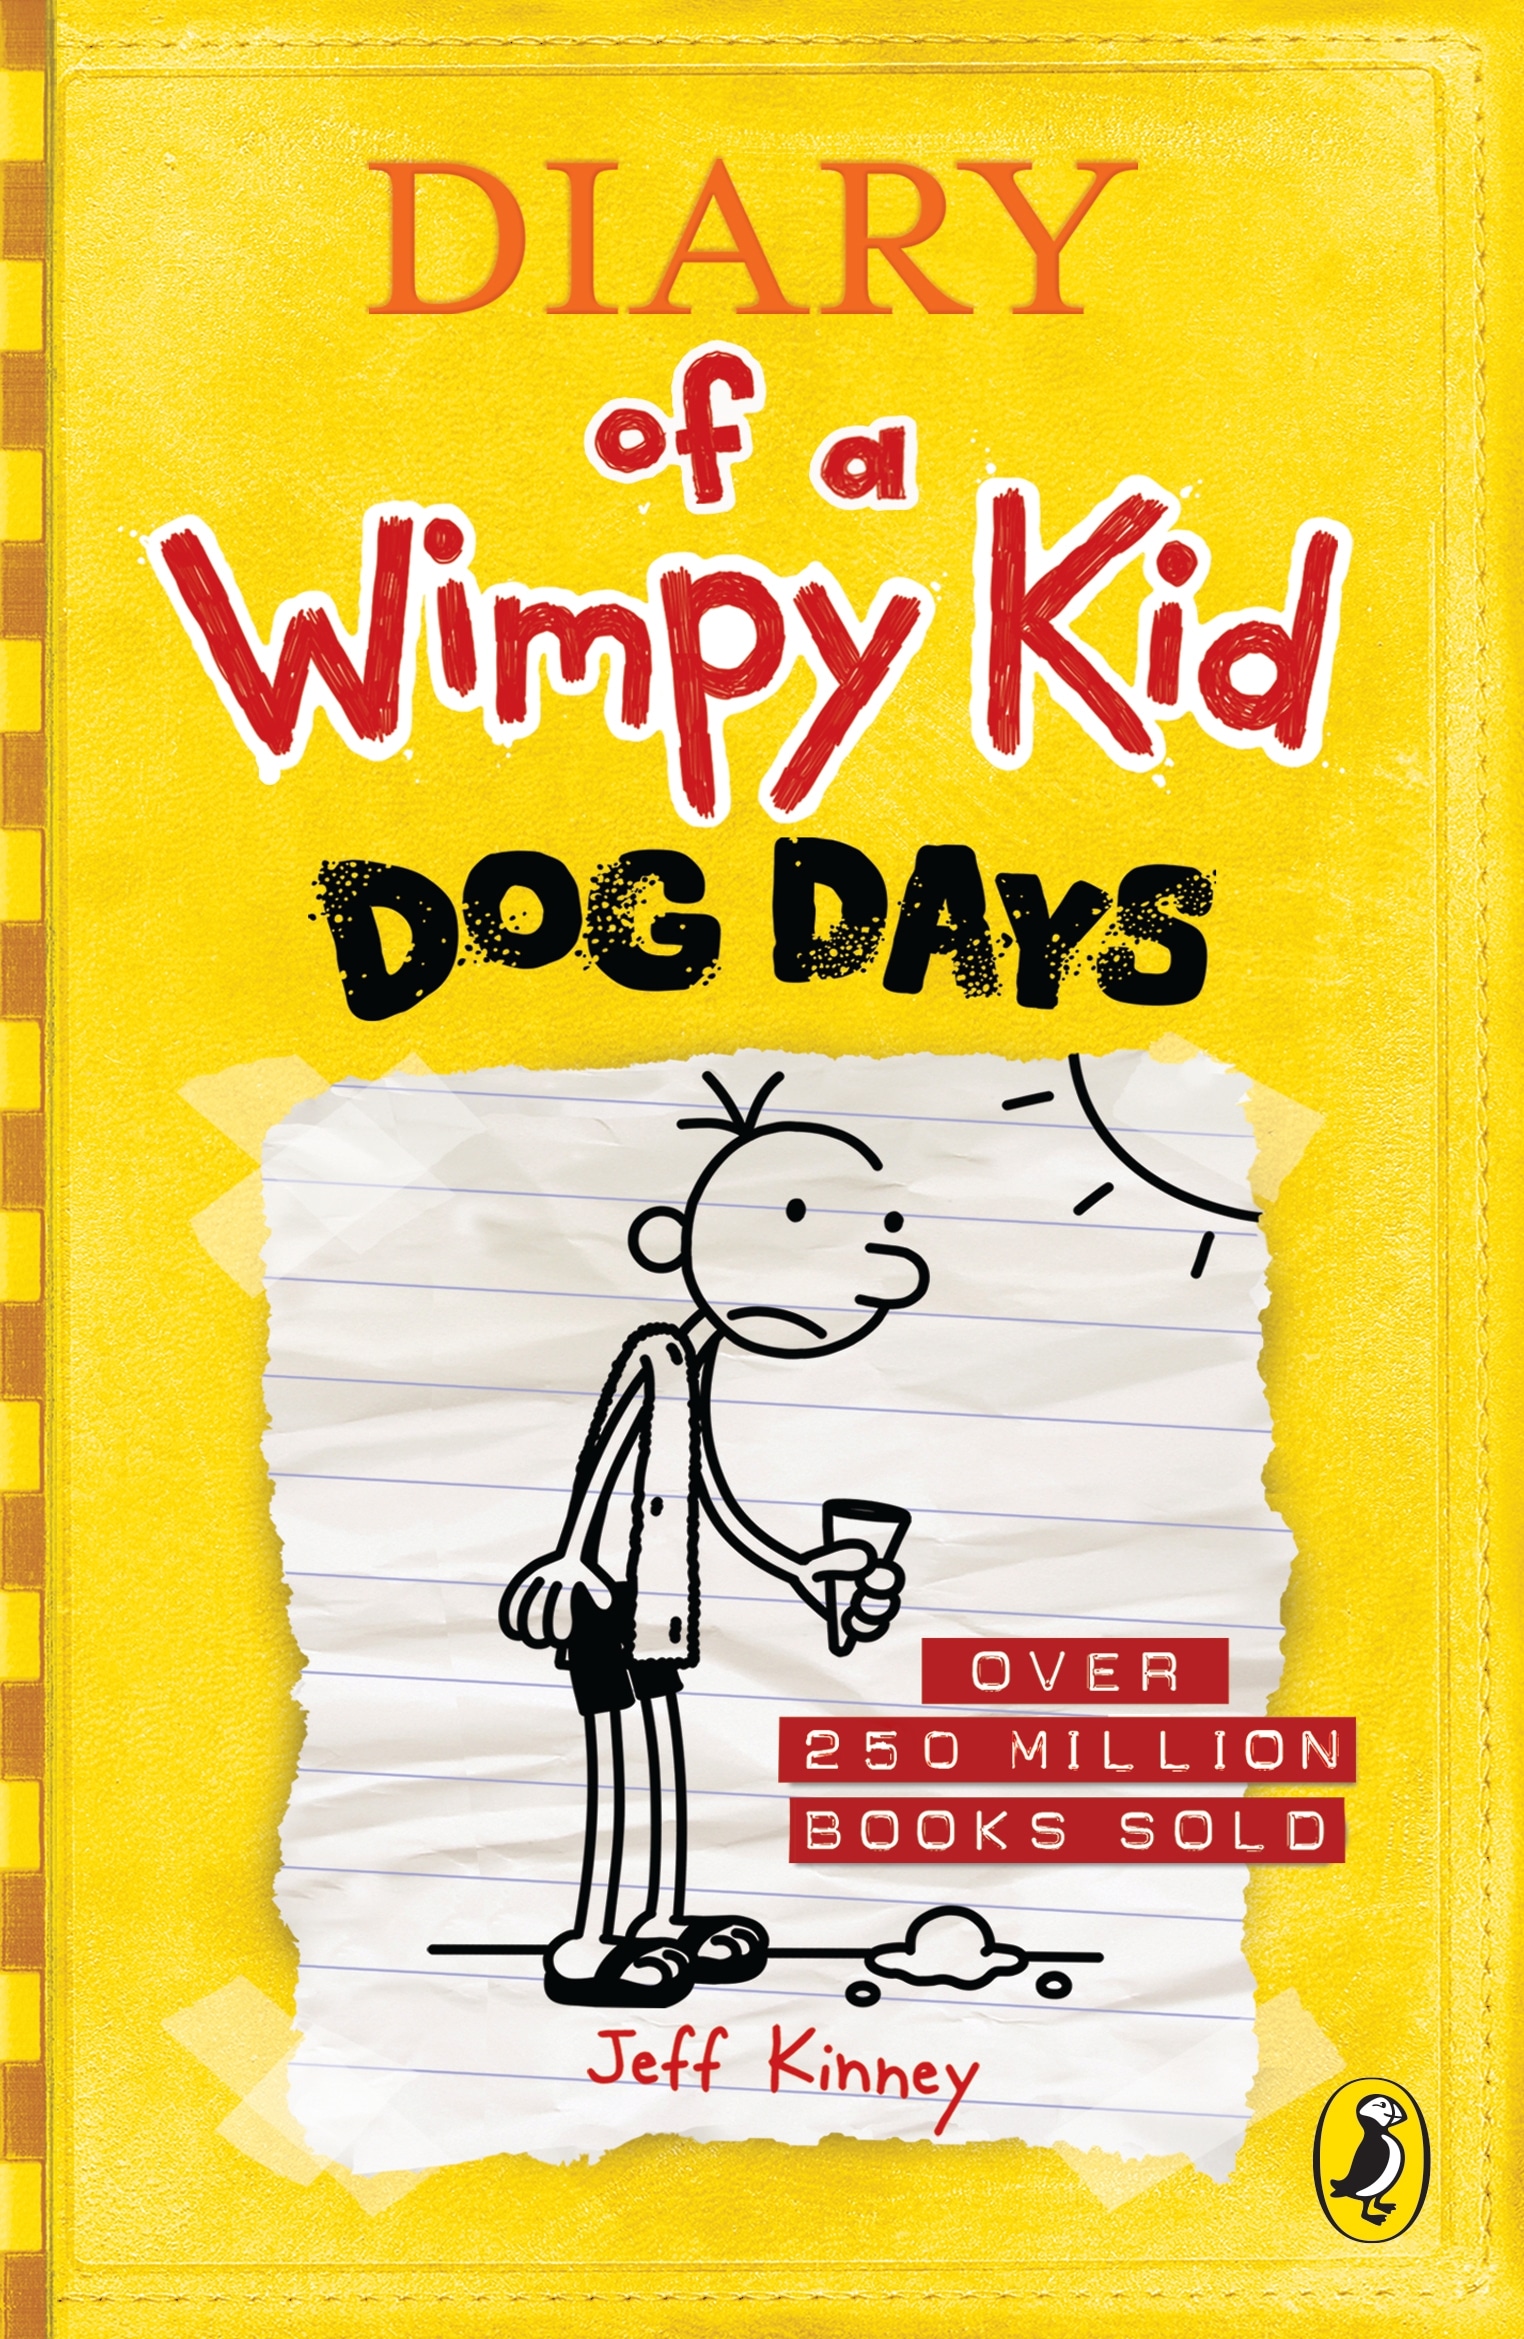 Book “Diary of a Wimpy Kid: Dog Days (Book 4)” by Jeff Kinney — February 3, 2011